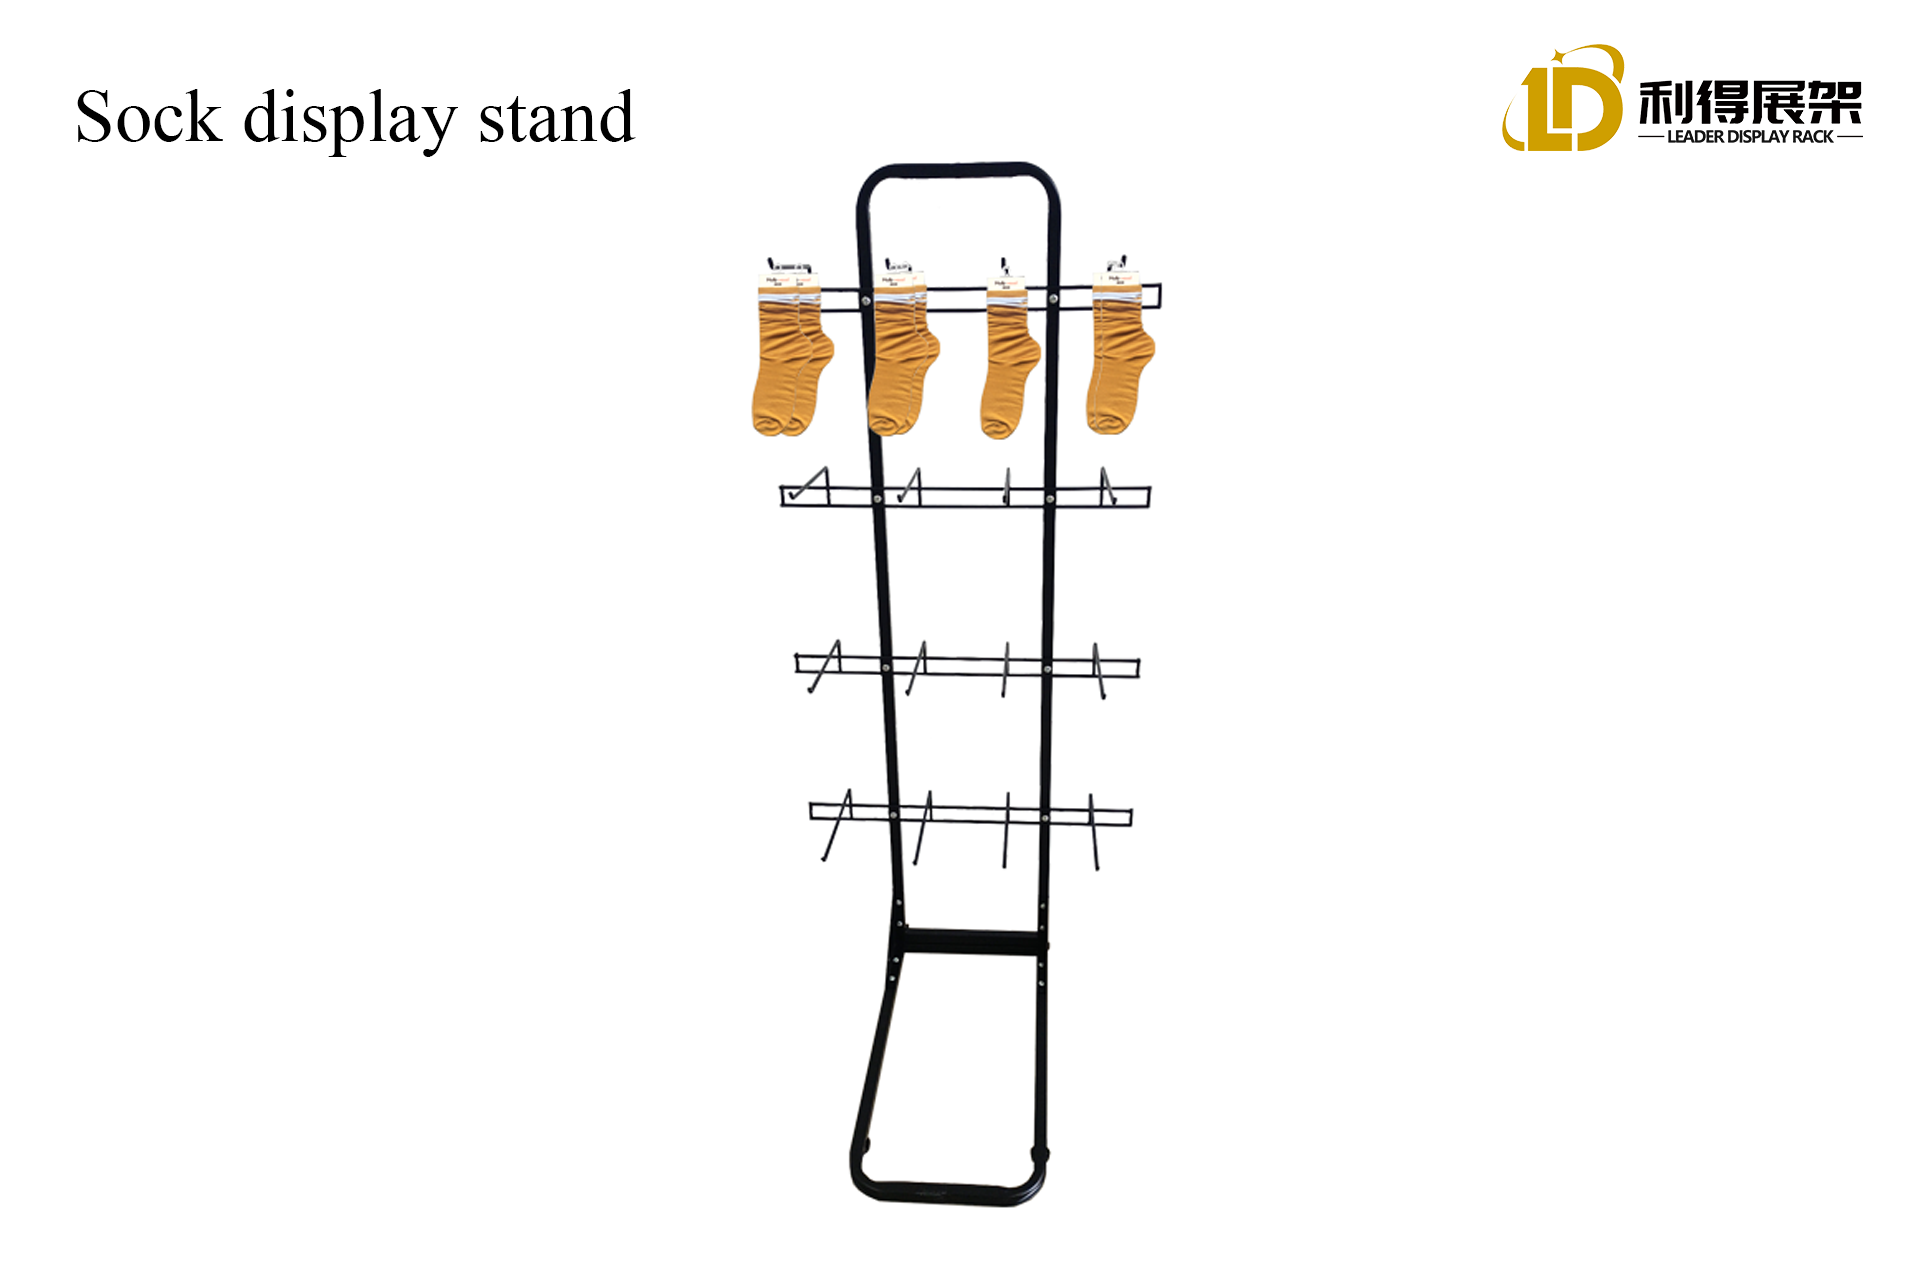 The Design And Function of The Sock Display Stand Are The Key To Enhancing The Retail Experience